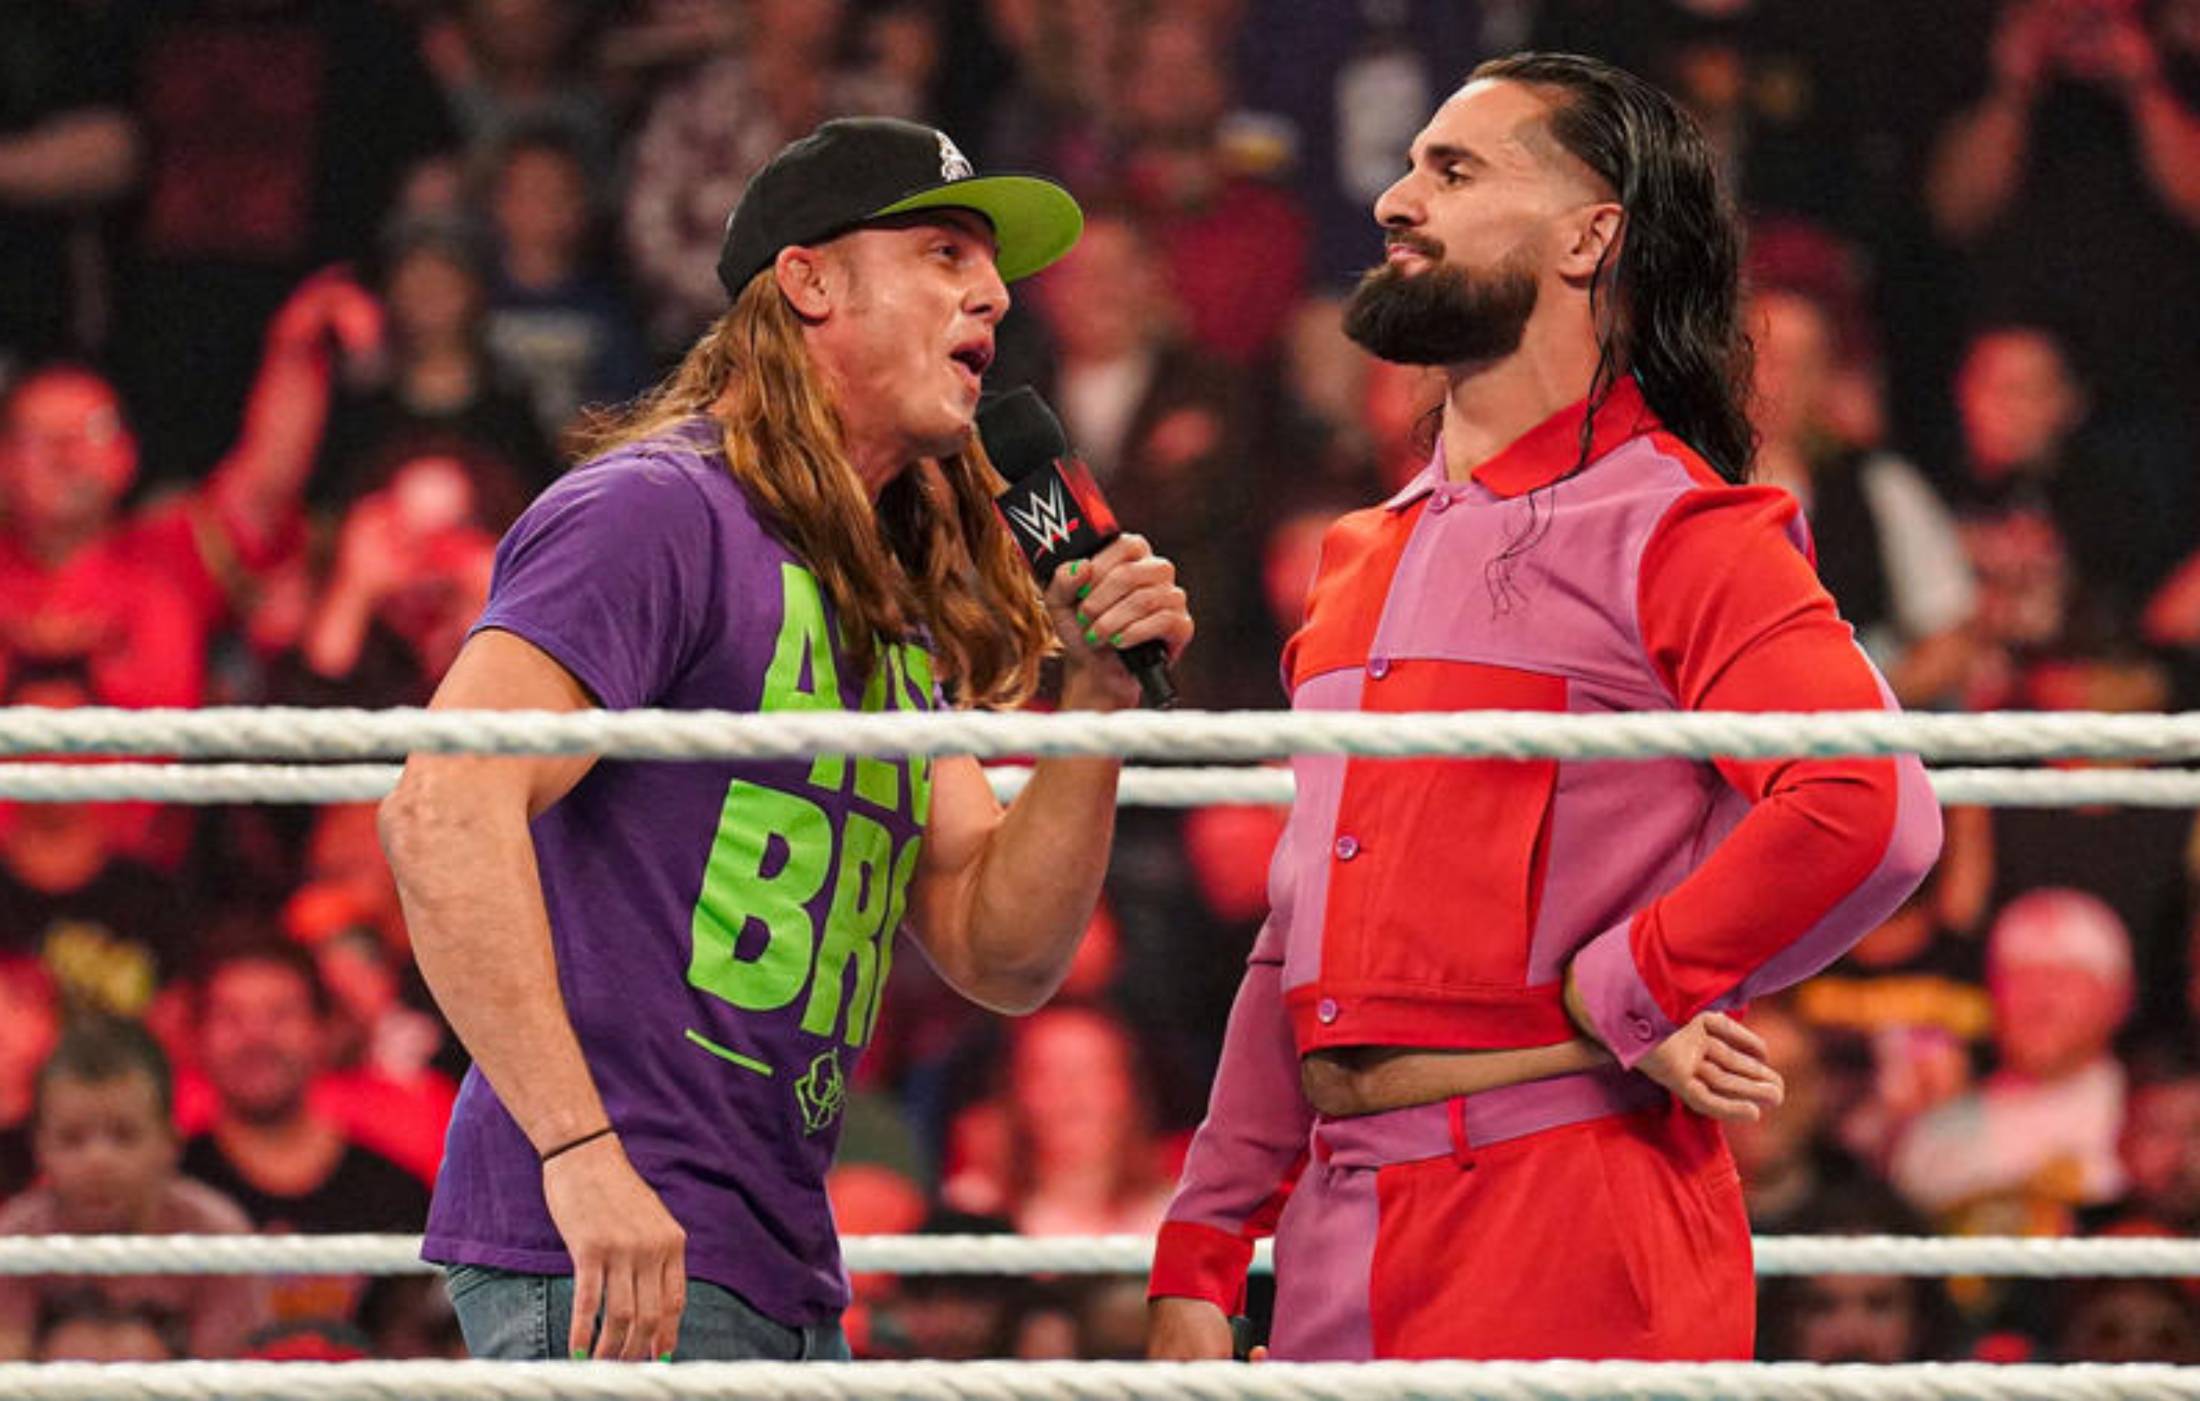 Seth Rollins and Matt Riddle shared the ring on WWE Raw last night